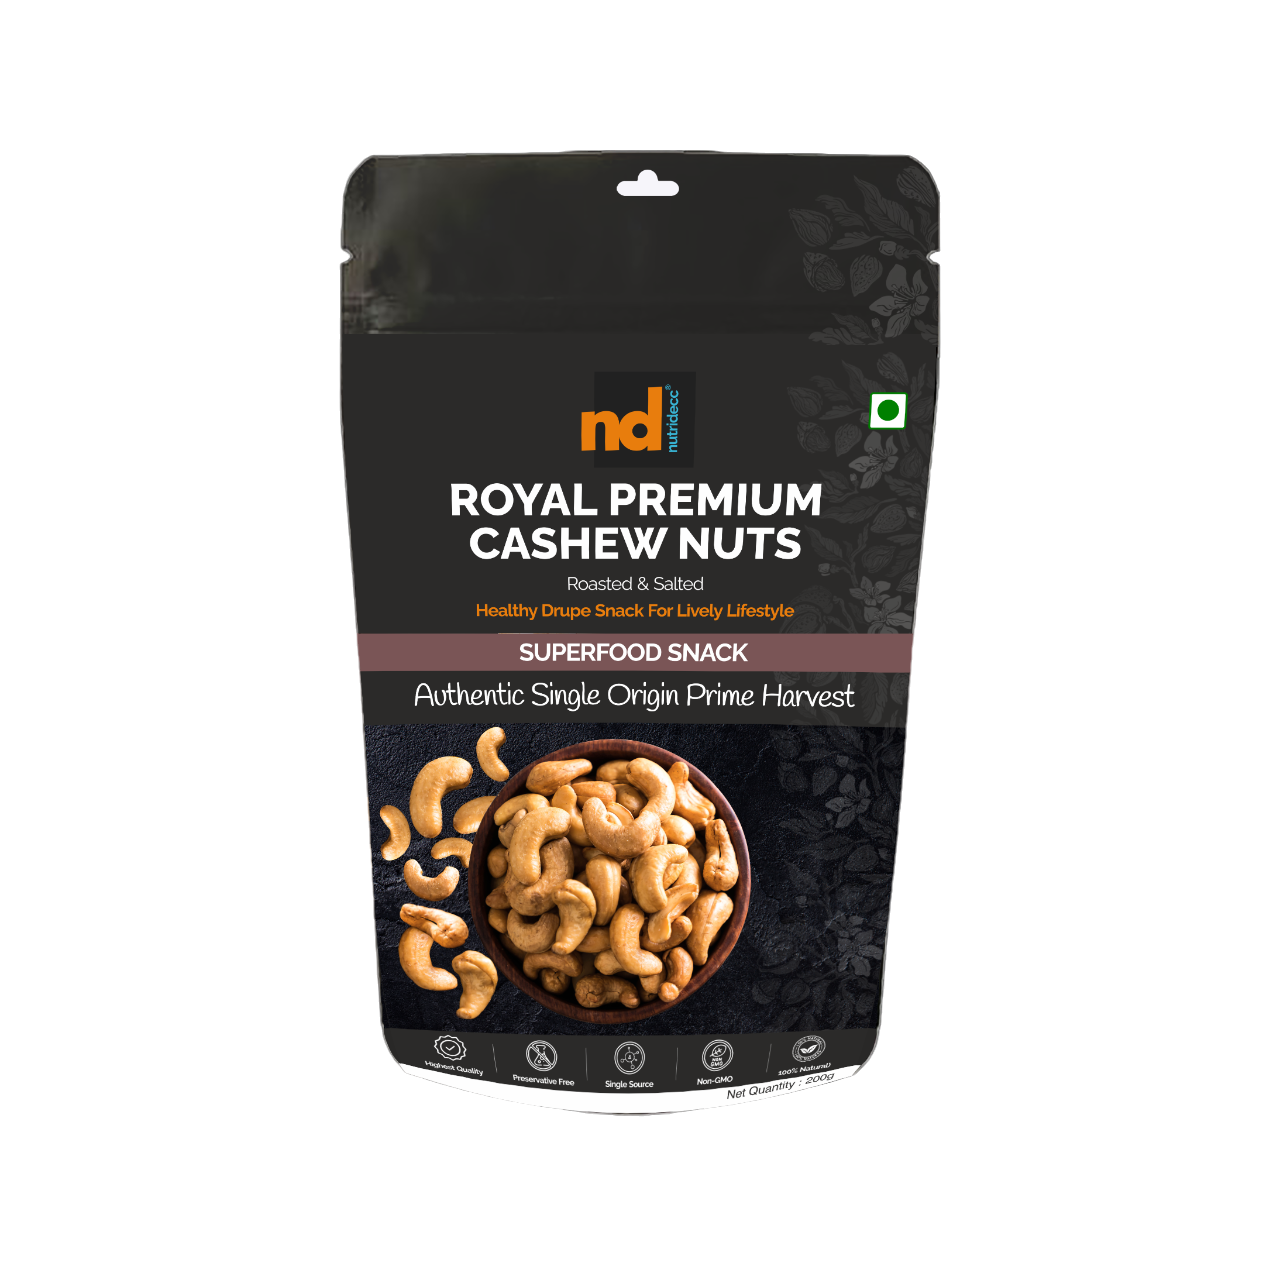 Nutridecc | Royal Premium Cashew Nuts: Indulge in Exquisite Taste and Nutritional Bliss